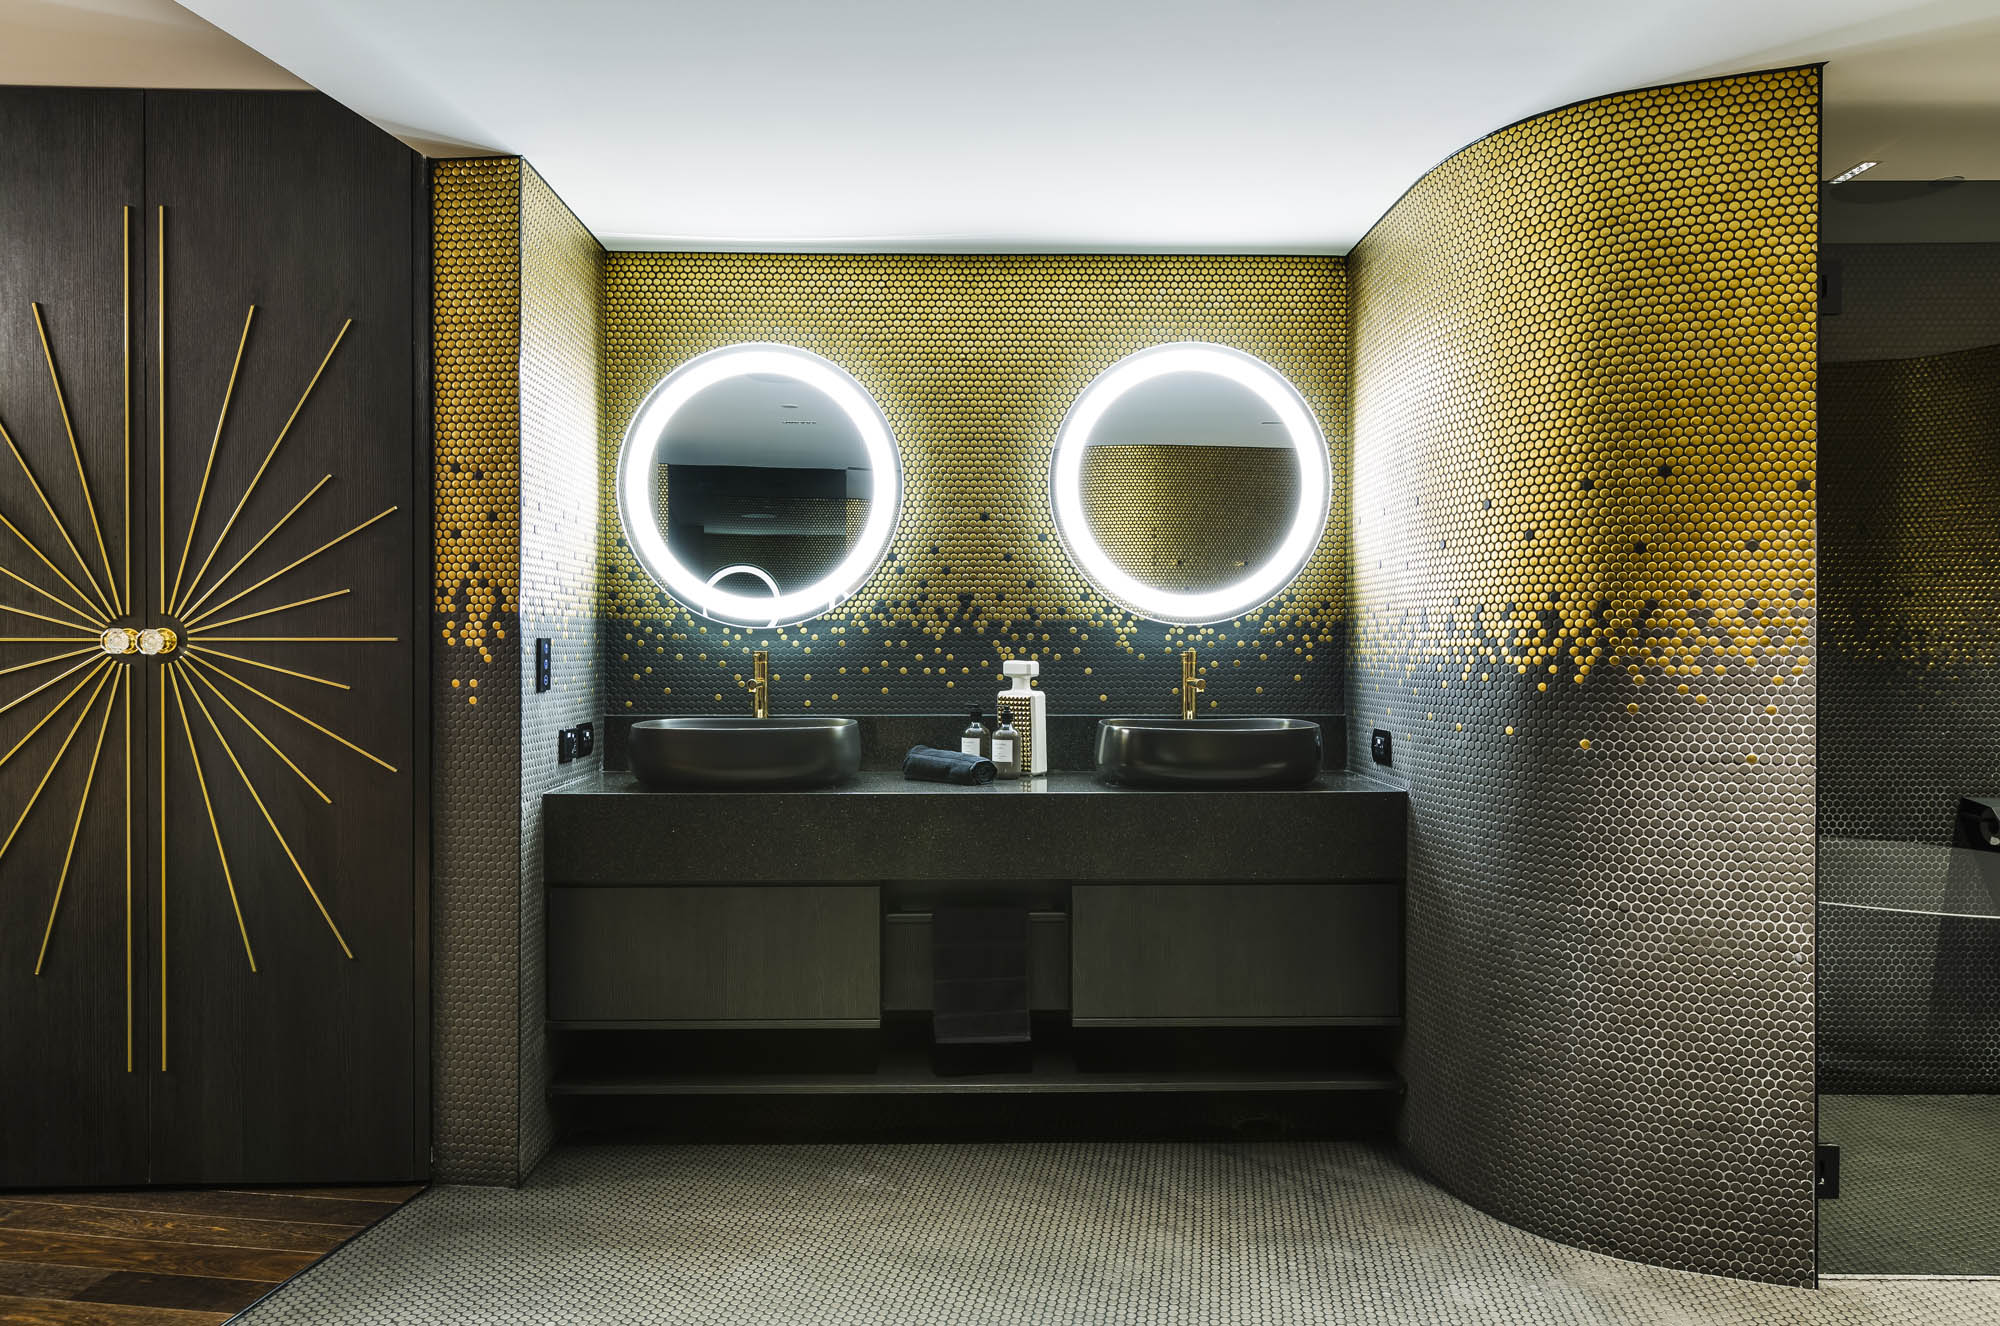 studios at the star sydney hotels design and construct nsw 70s glam bathroom gold glitter retro